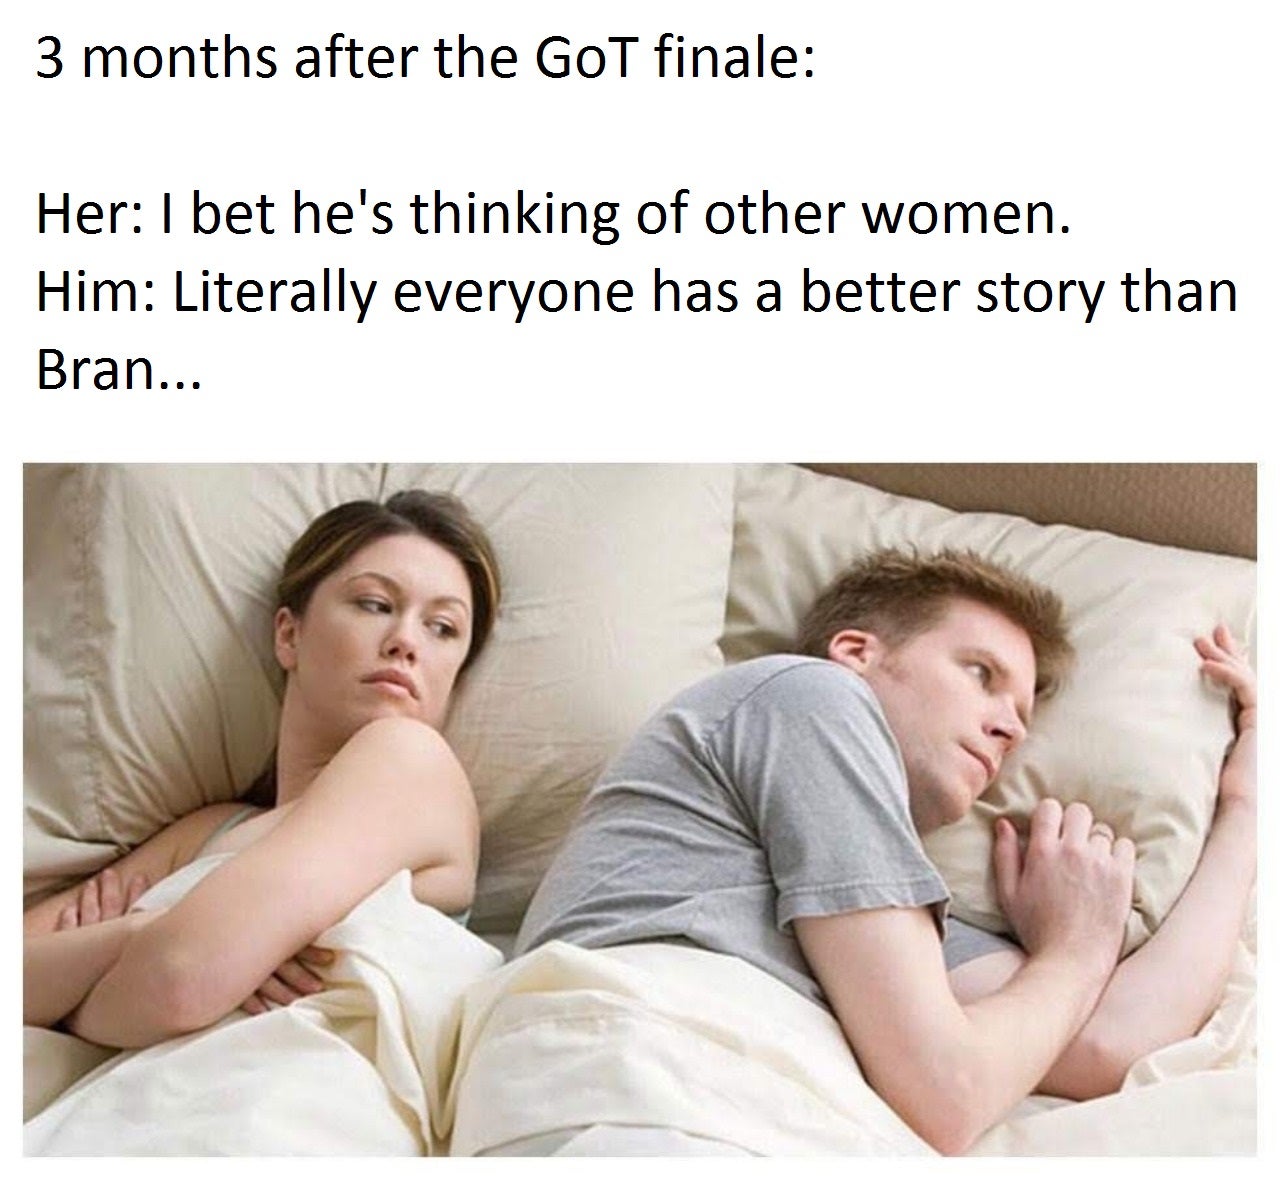 Funny memes - he's thinking about another woman meme - 3 months after the GoT finale Her I bet he's thinking of other women. Him Literally everyone has a better story than Bran...